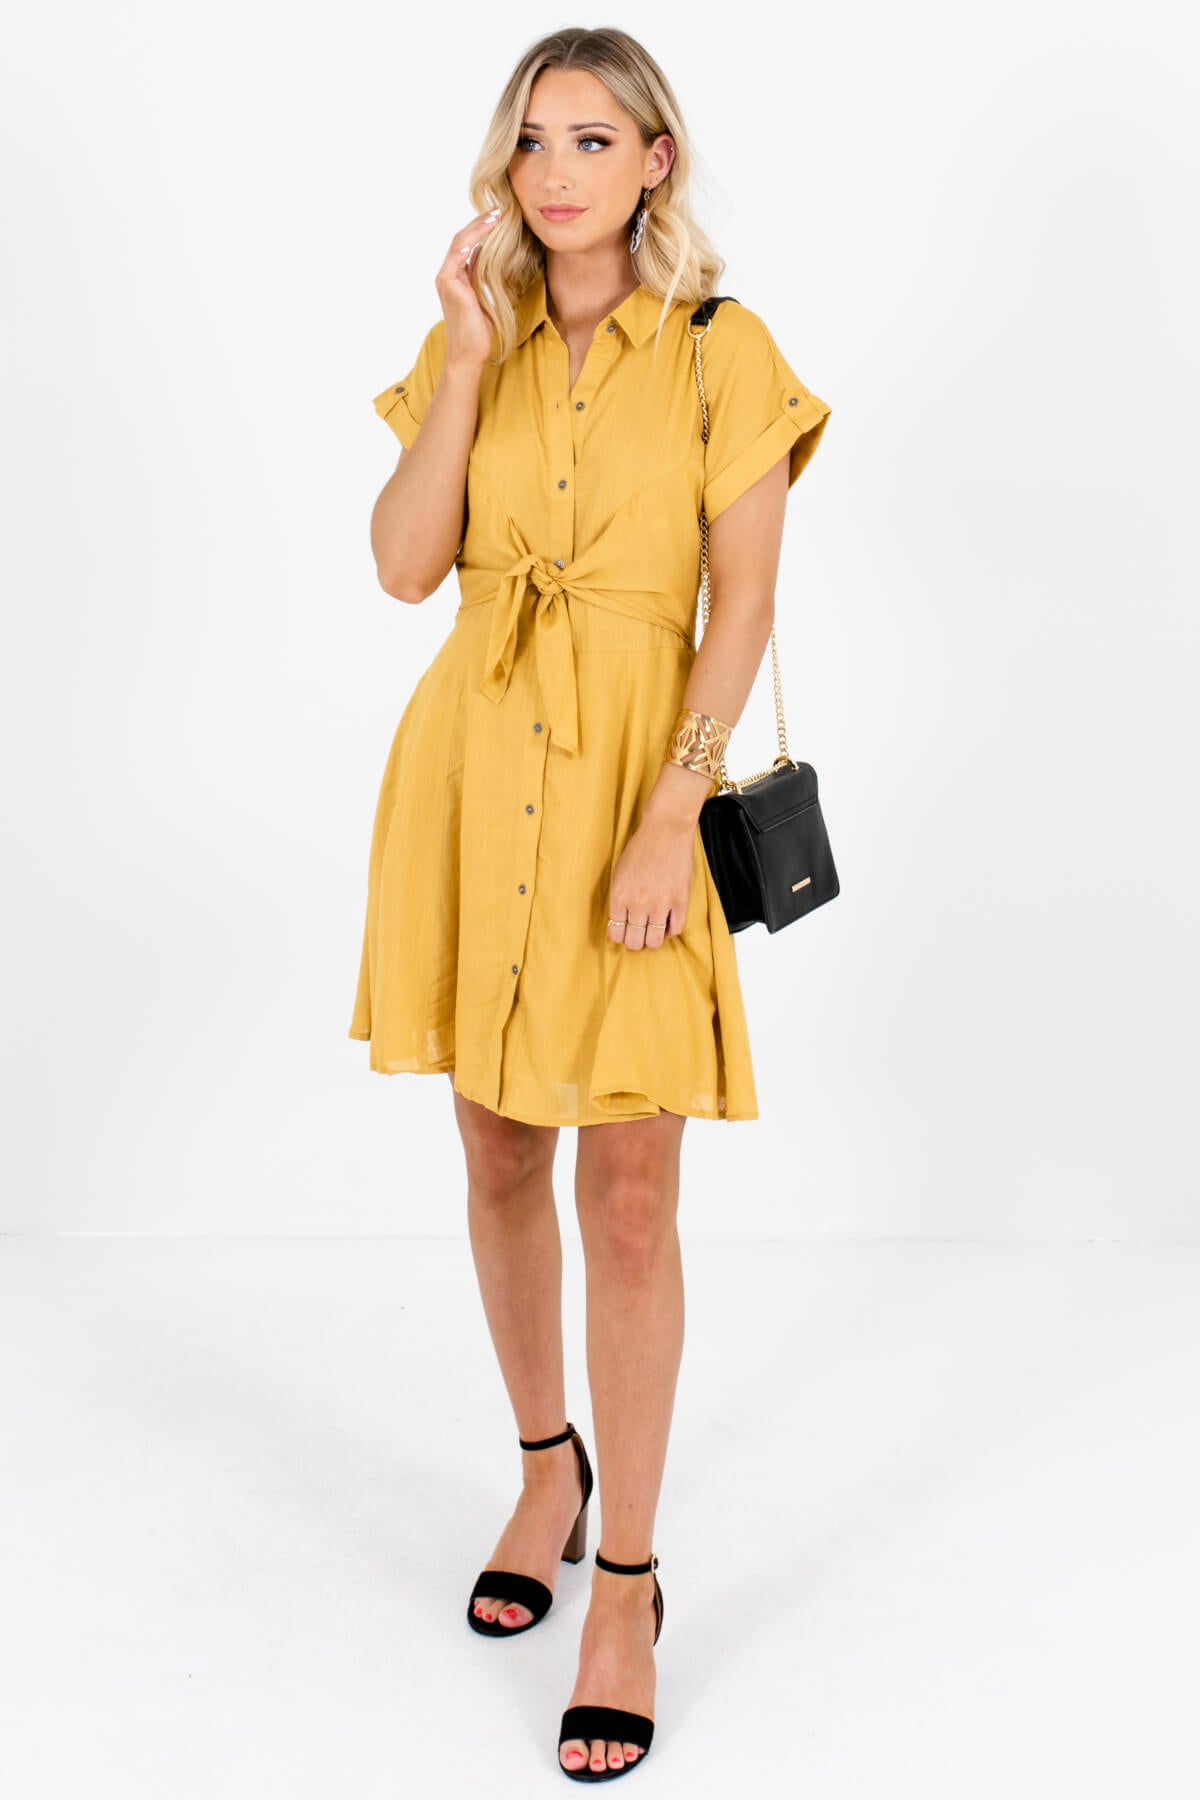 Mustard Yellow Cute and Comfortable Boutique Mini Dresses for Women